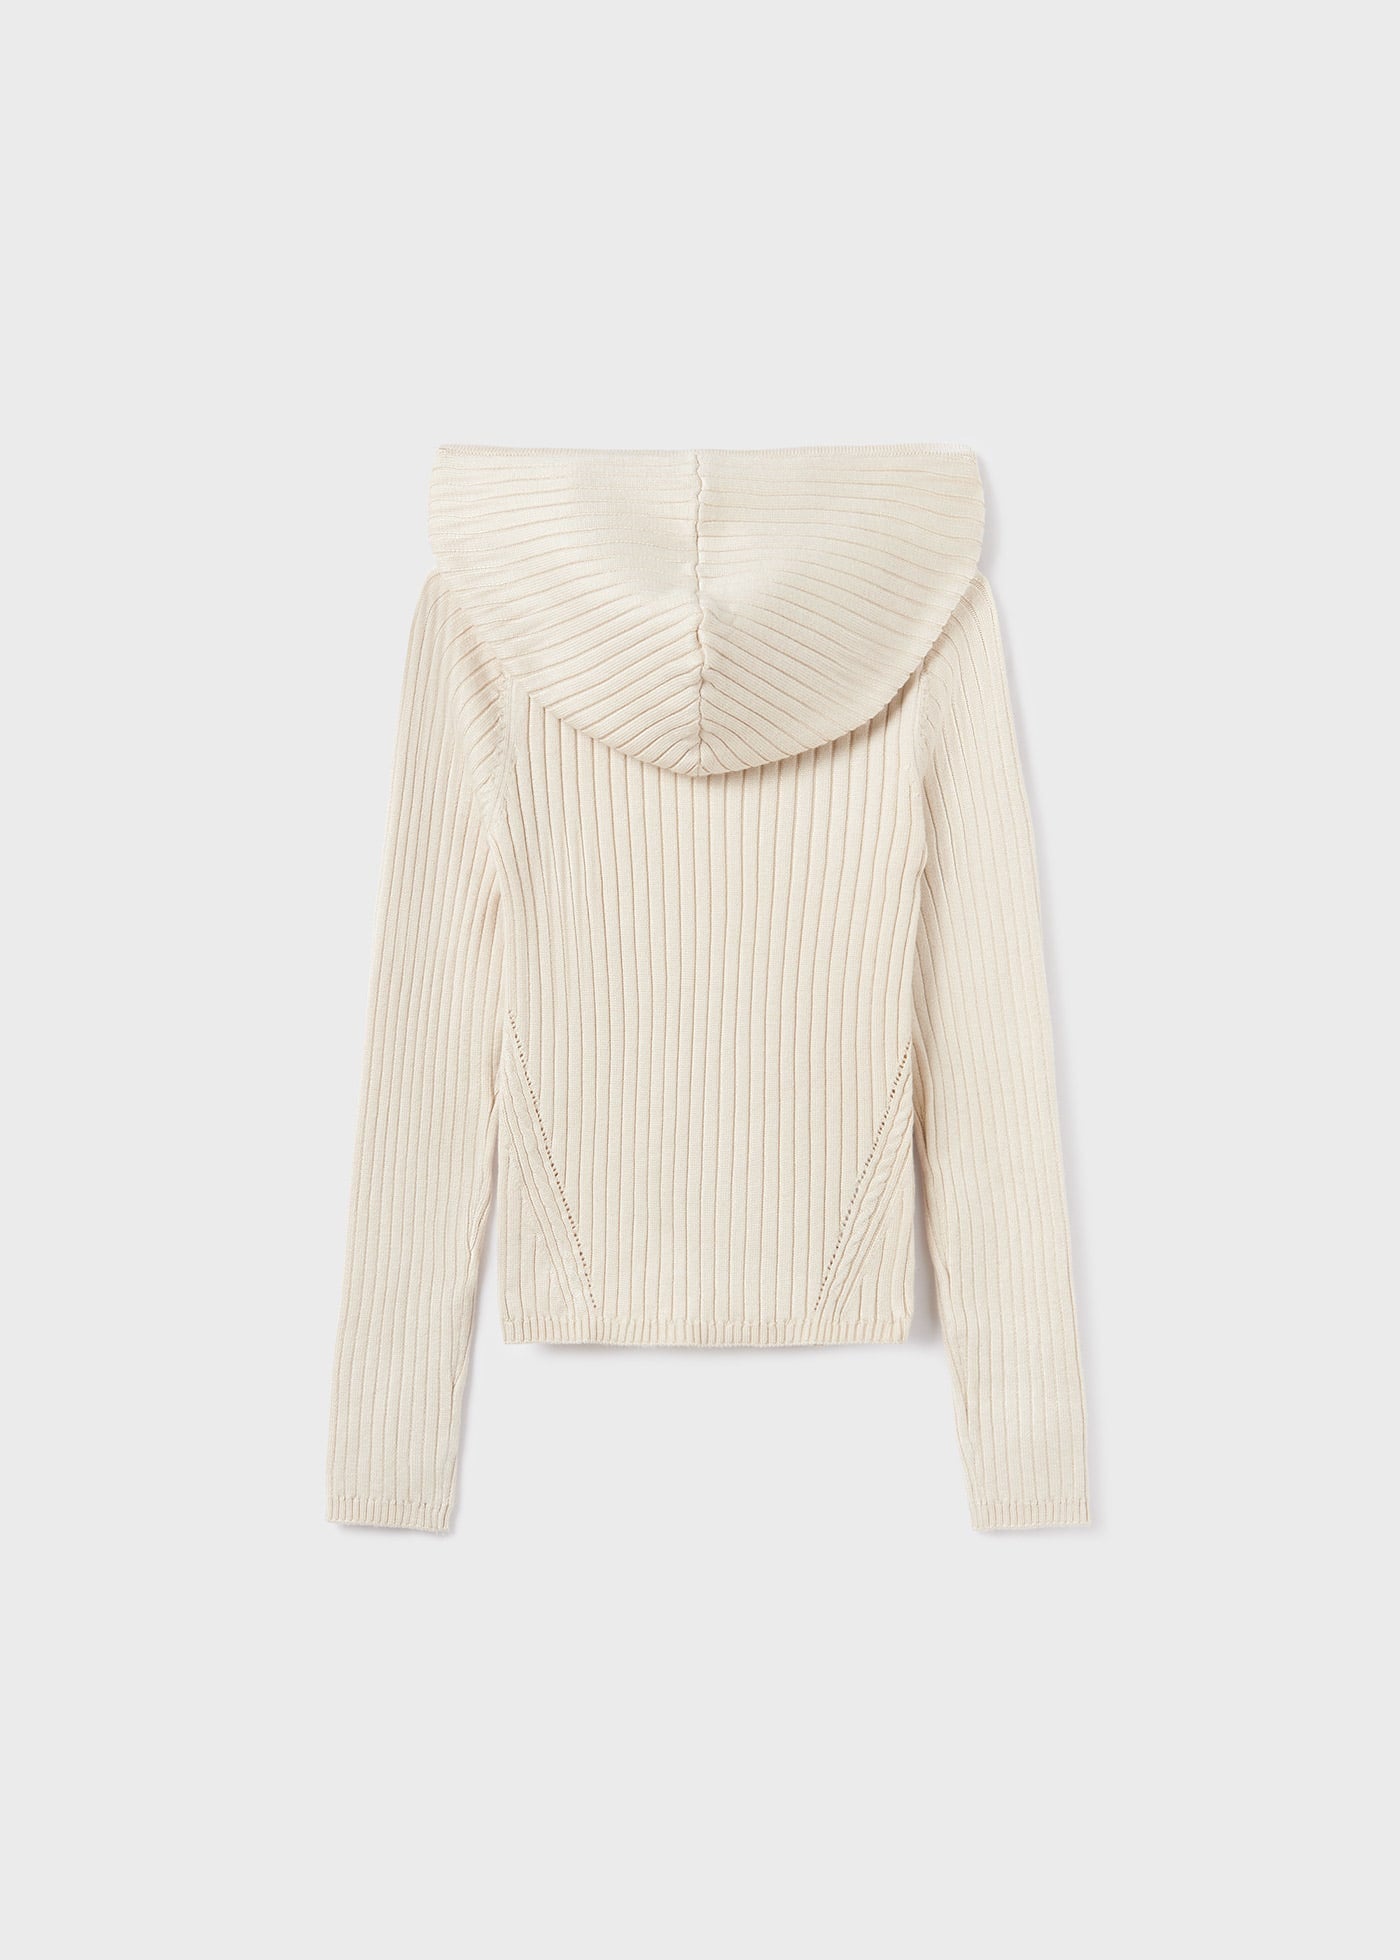 Ribbed Zip Up Cardigan in Oat